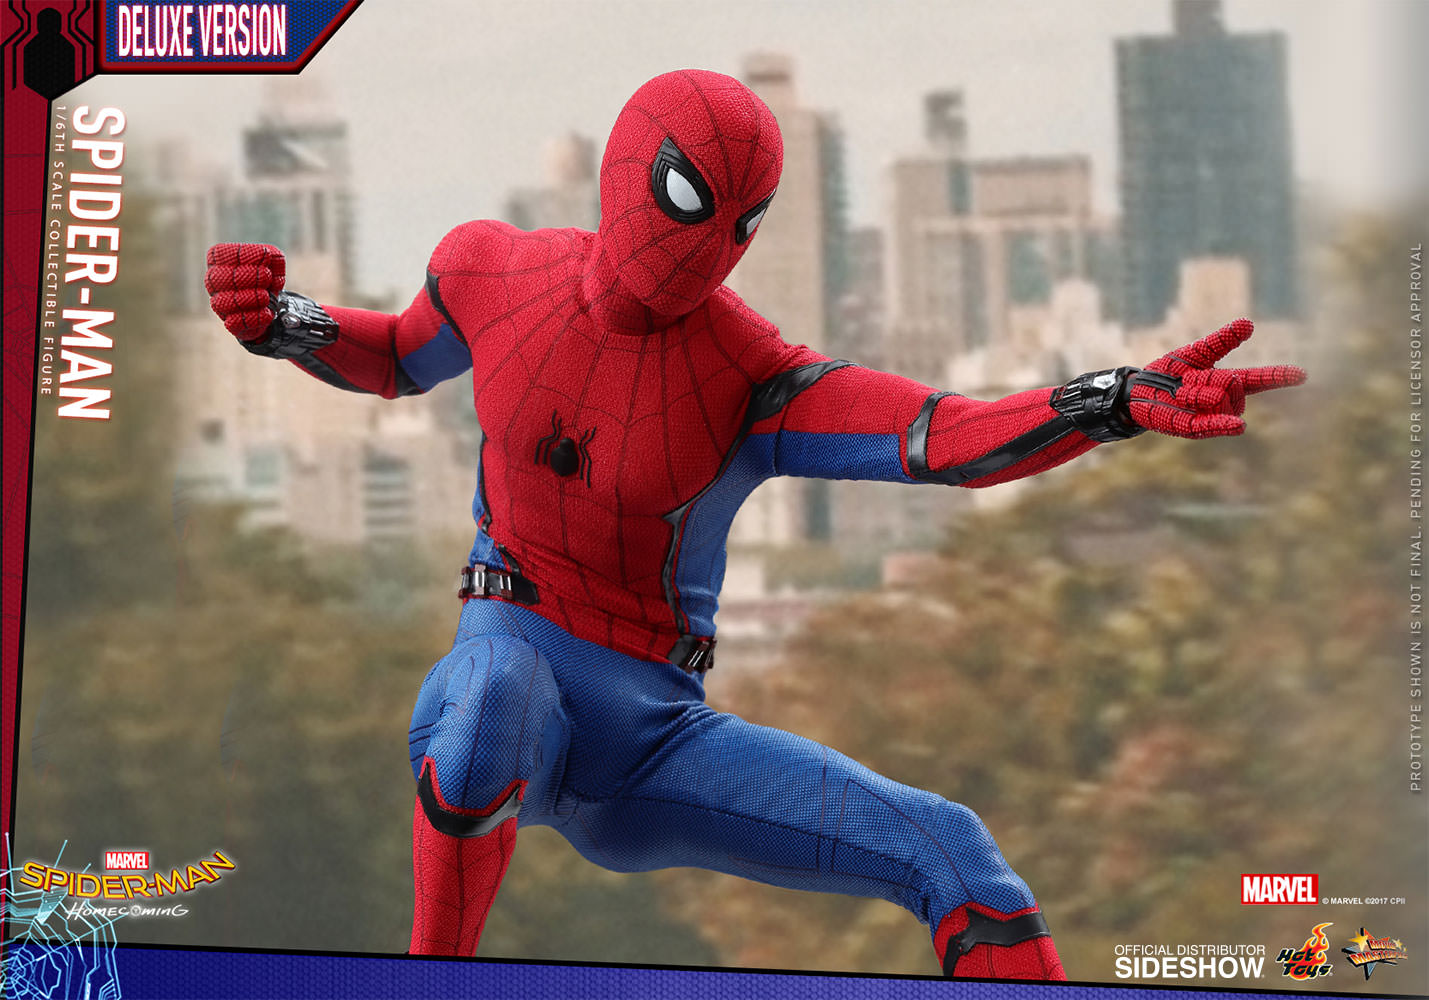 marvel-homecoming-spider-man-sixth-scale-deluxe-version-hot-toys-903064-17.jpg